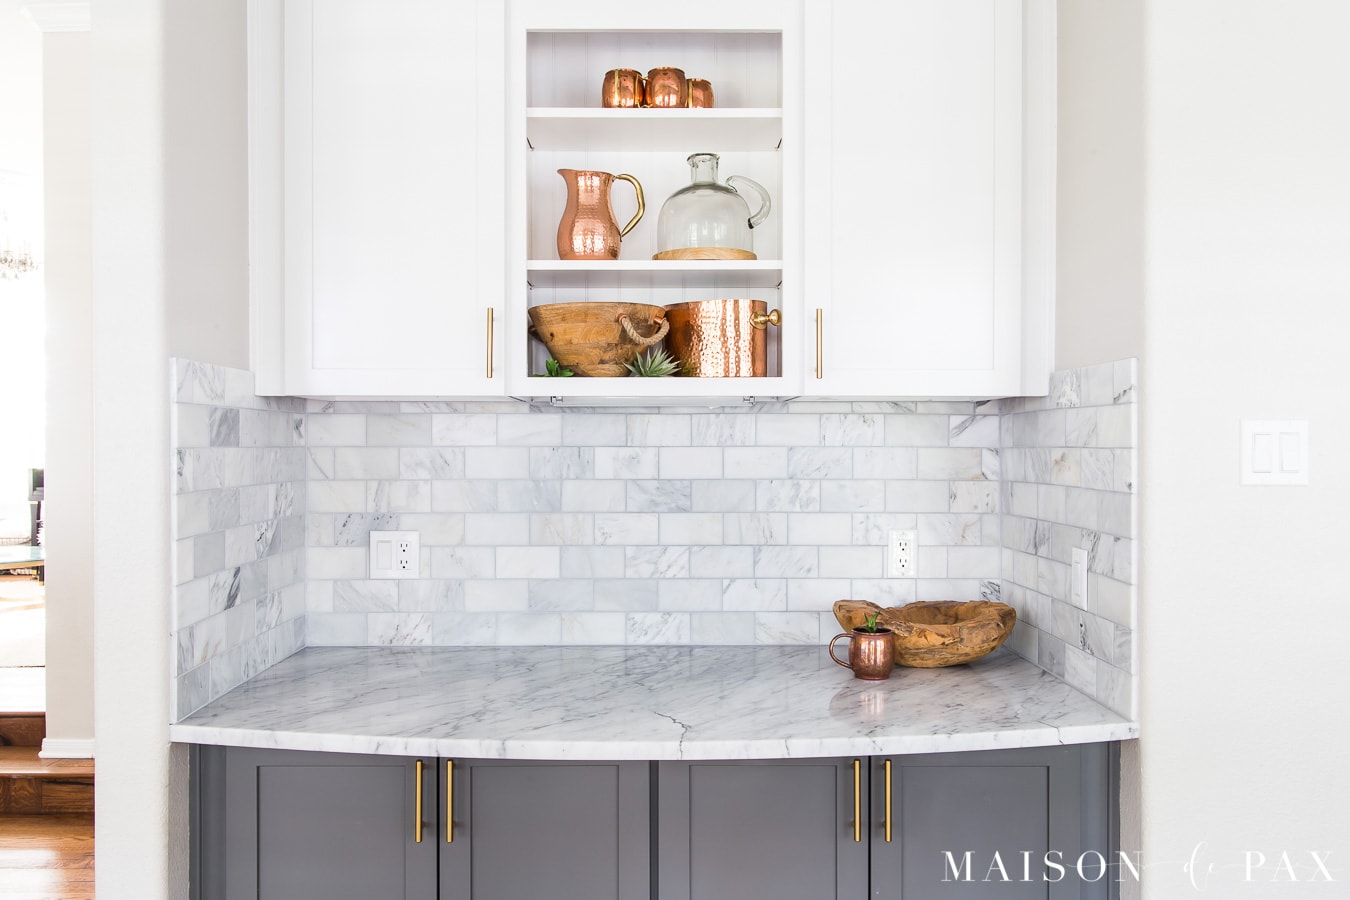 gray lower cabinets with white uppers and marble countertops | Maison de Pax